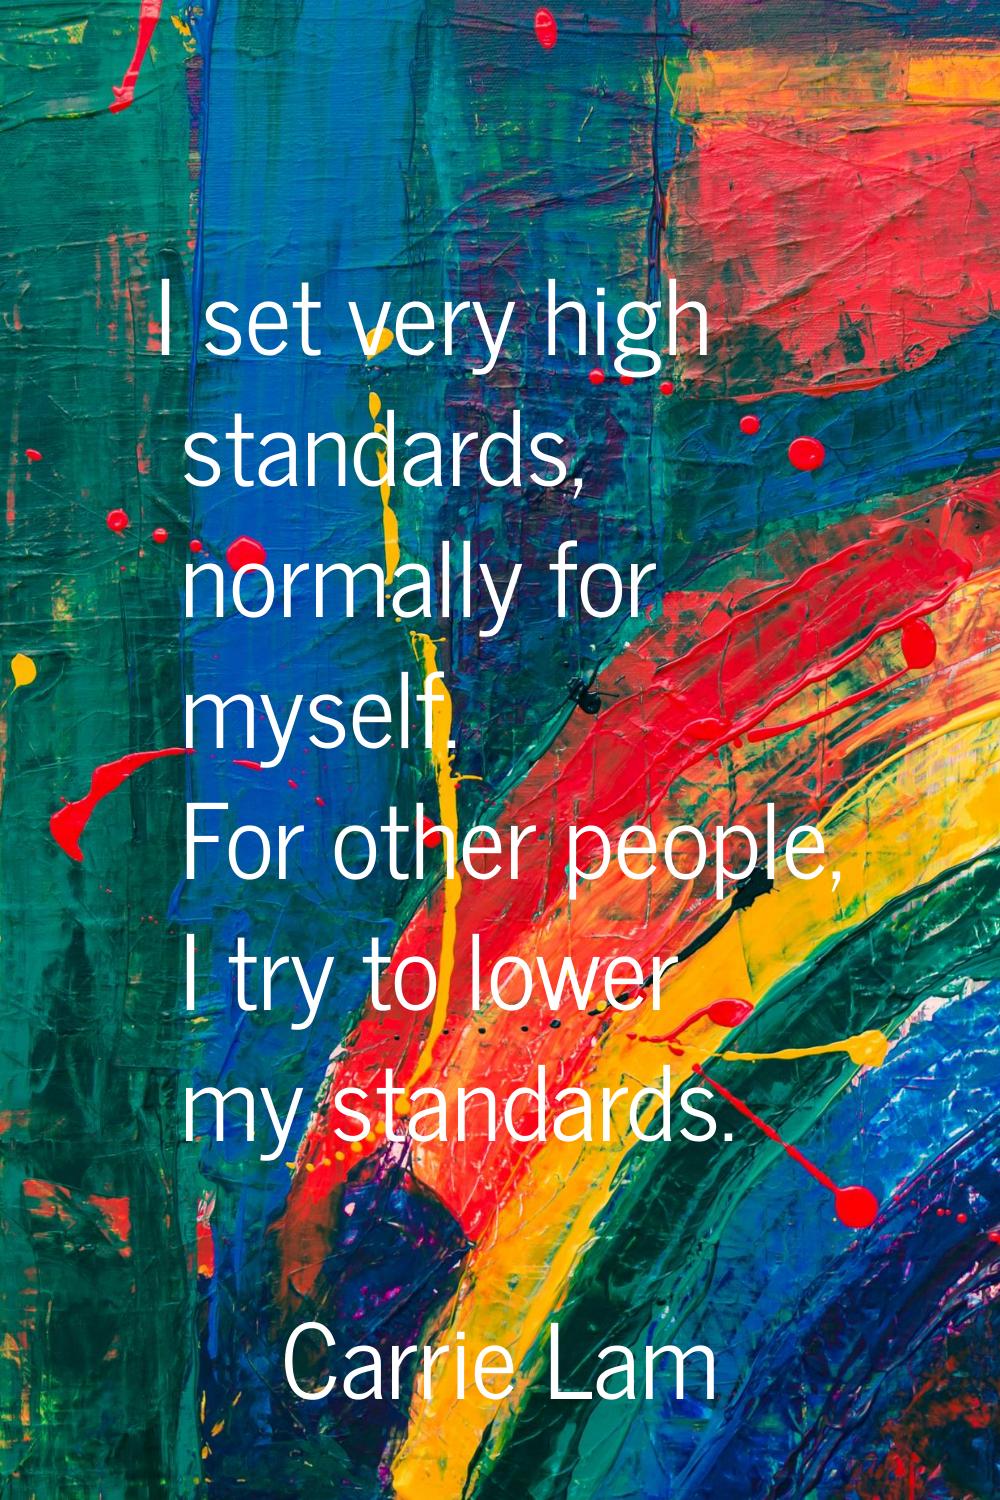 I set very high standards, normally for myself. For other people, I try to lower my standards.